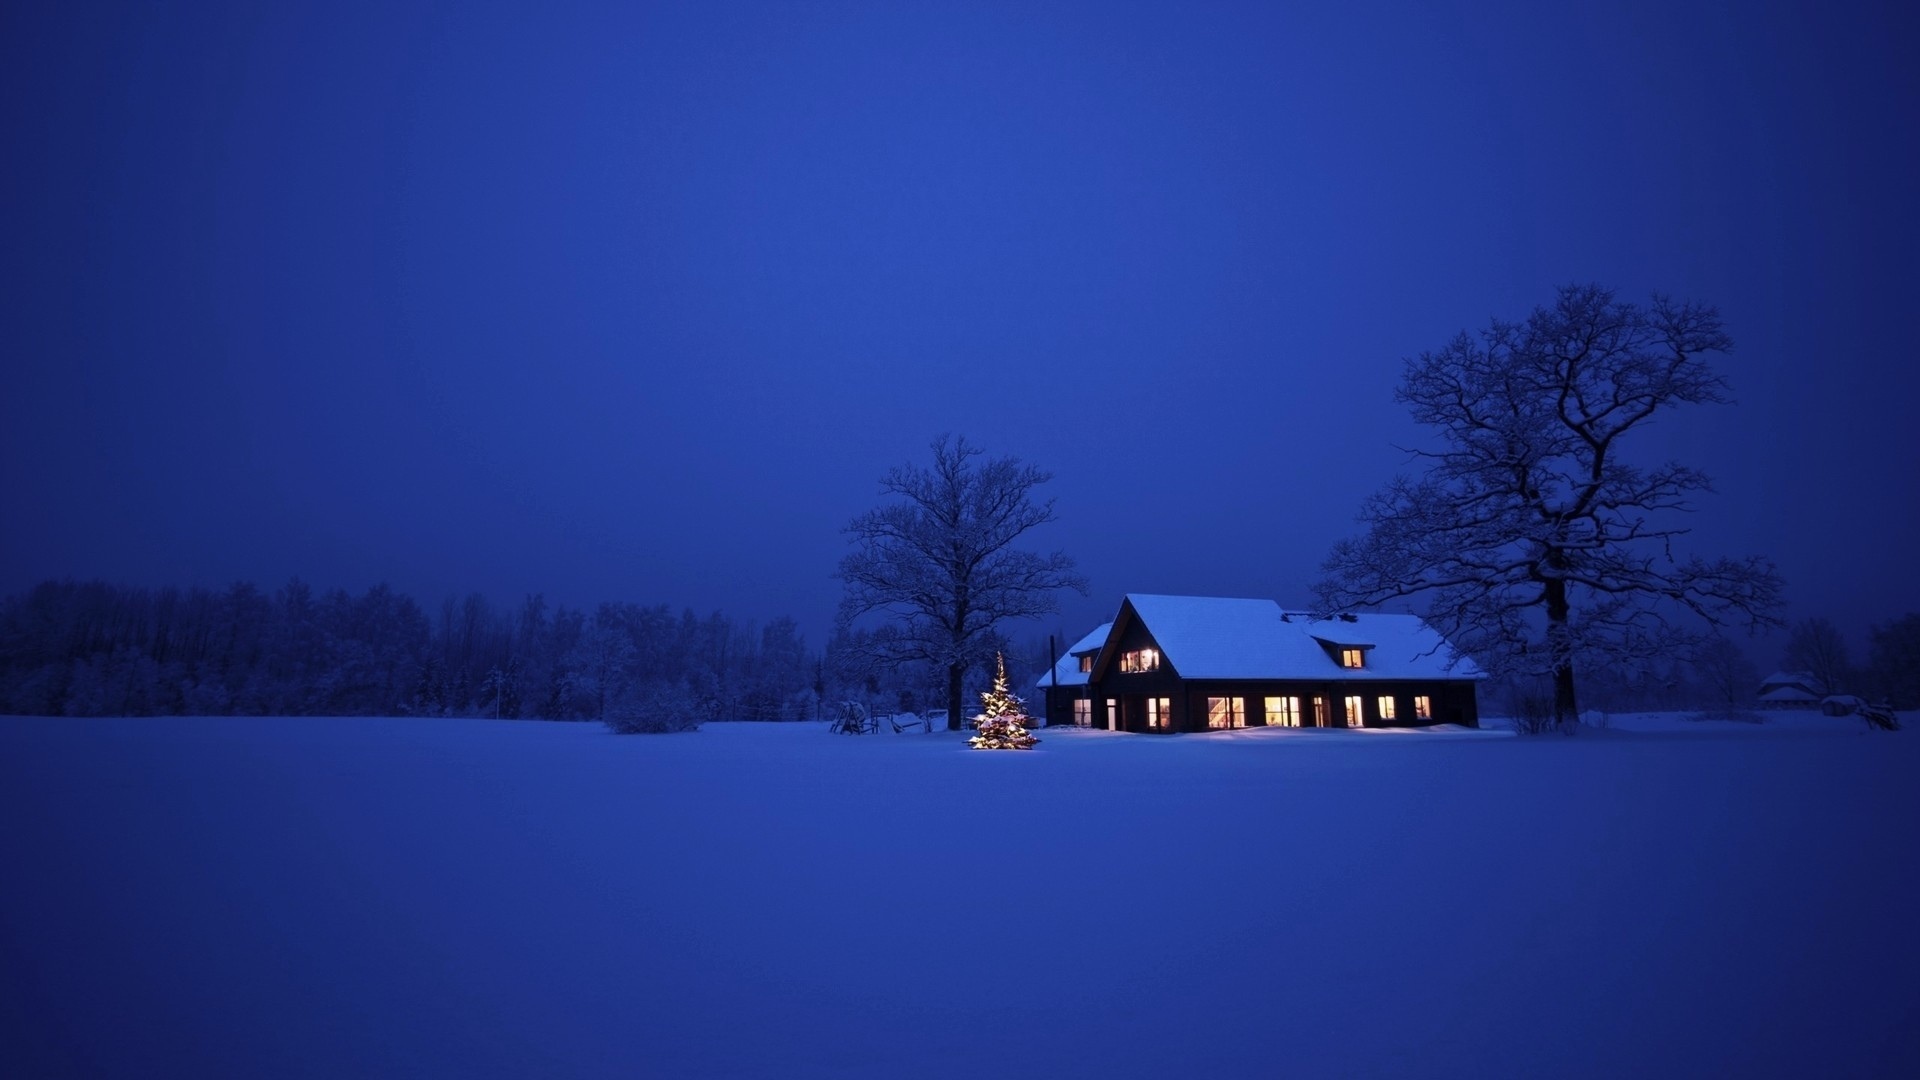 snow, houses, christmas xmas, new year, landscape, holidays, winter, blue iphone wallpaper